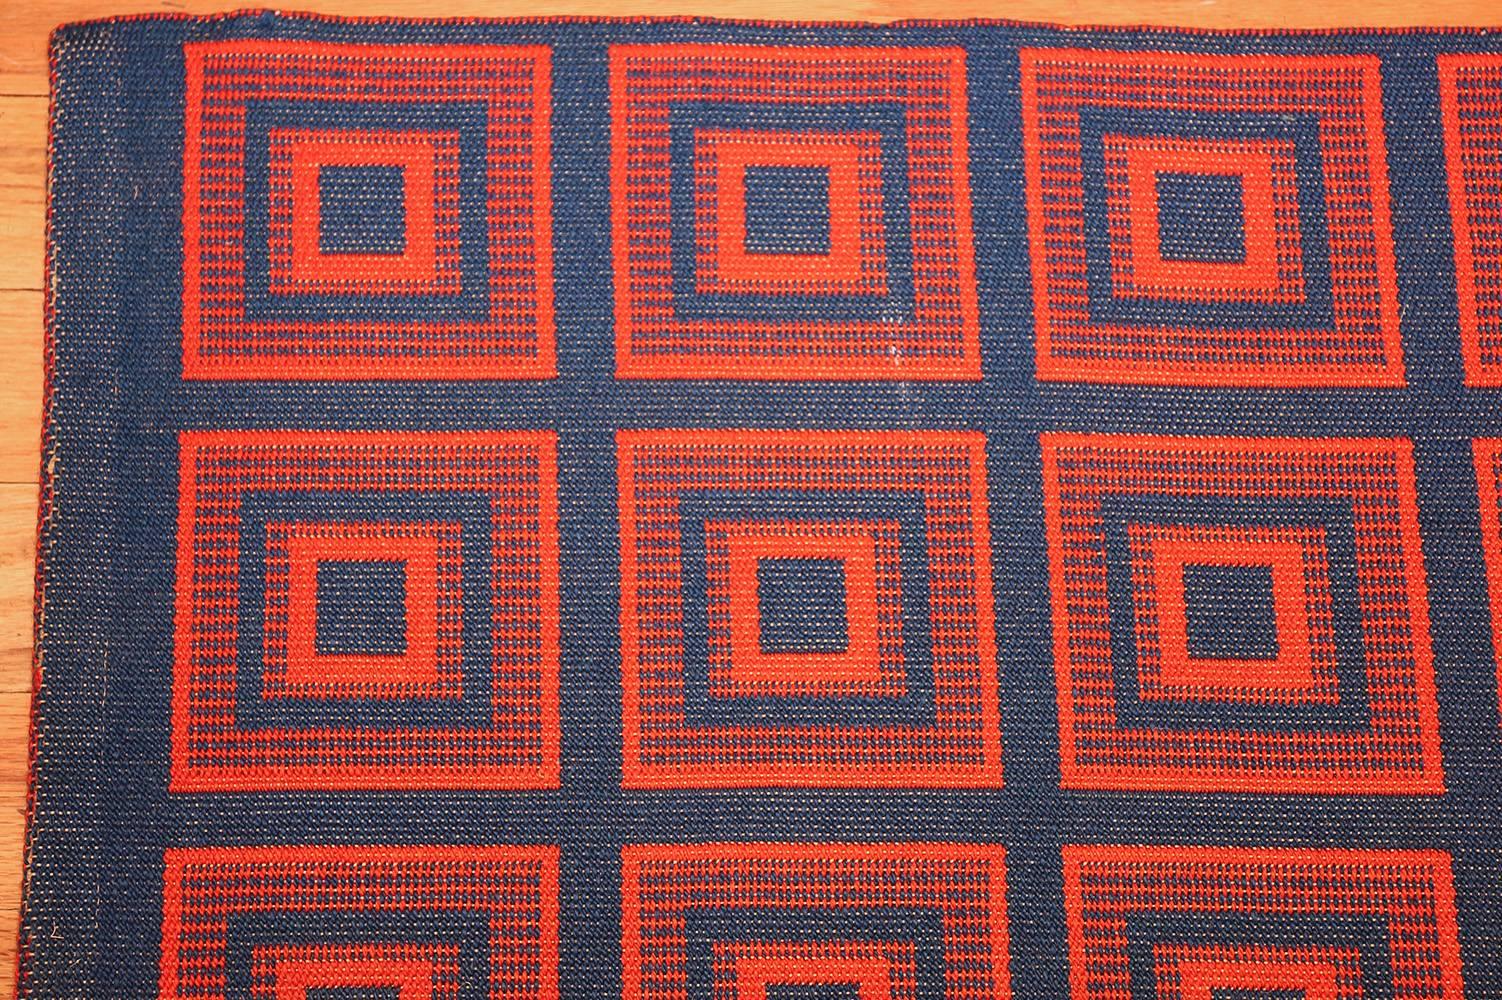 Hand-Woven Artistic Vintage Square Design Double Sided Swedish Kilim 5' x 7'8